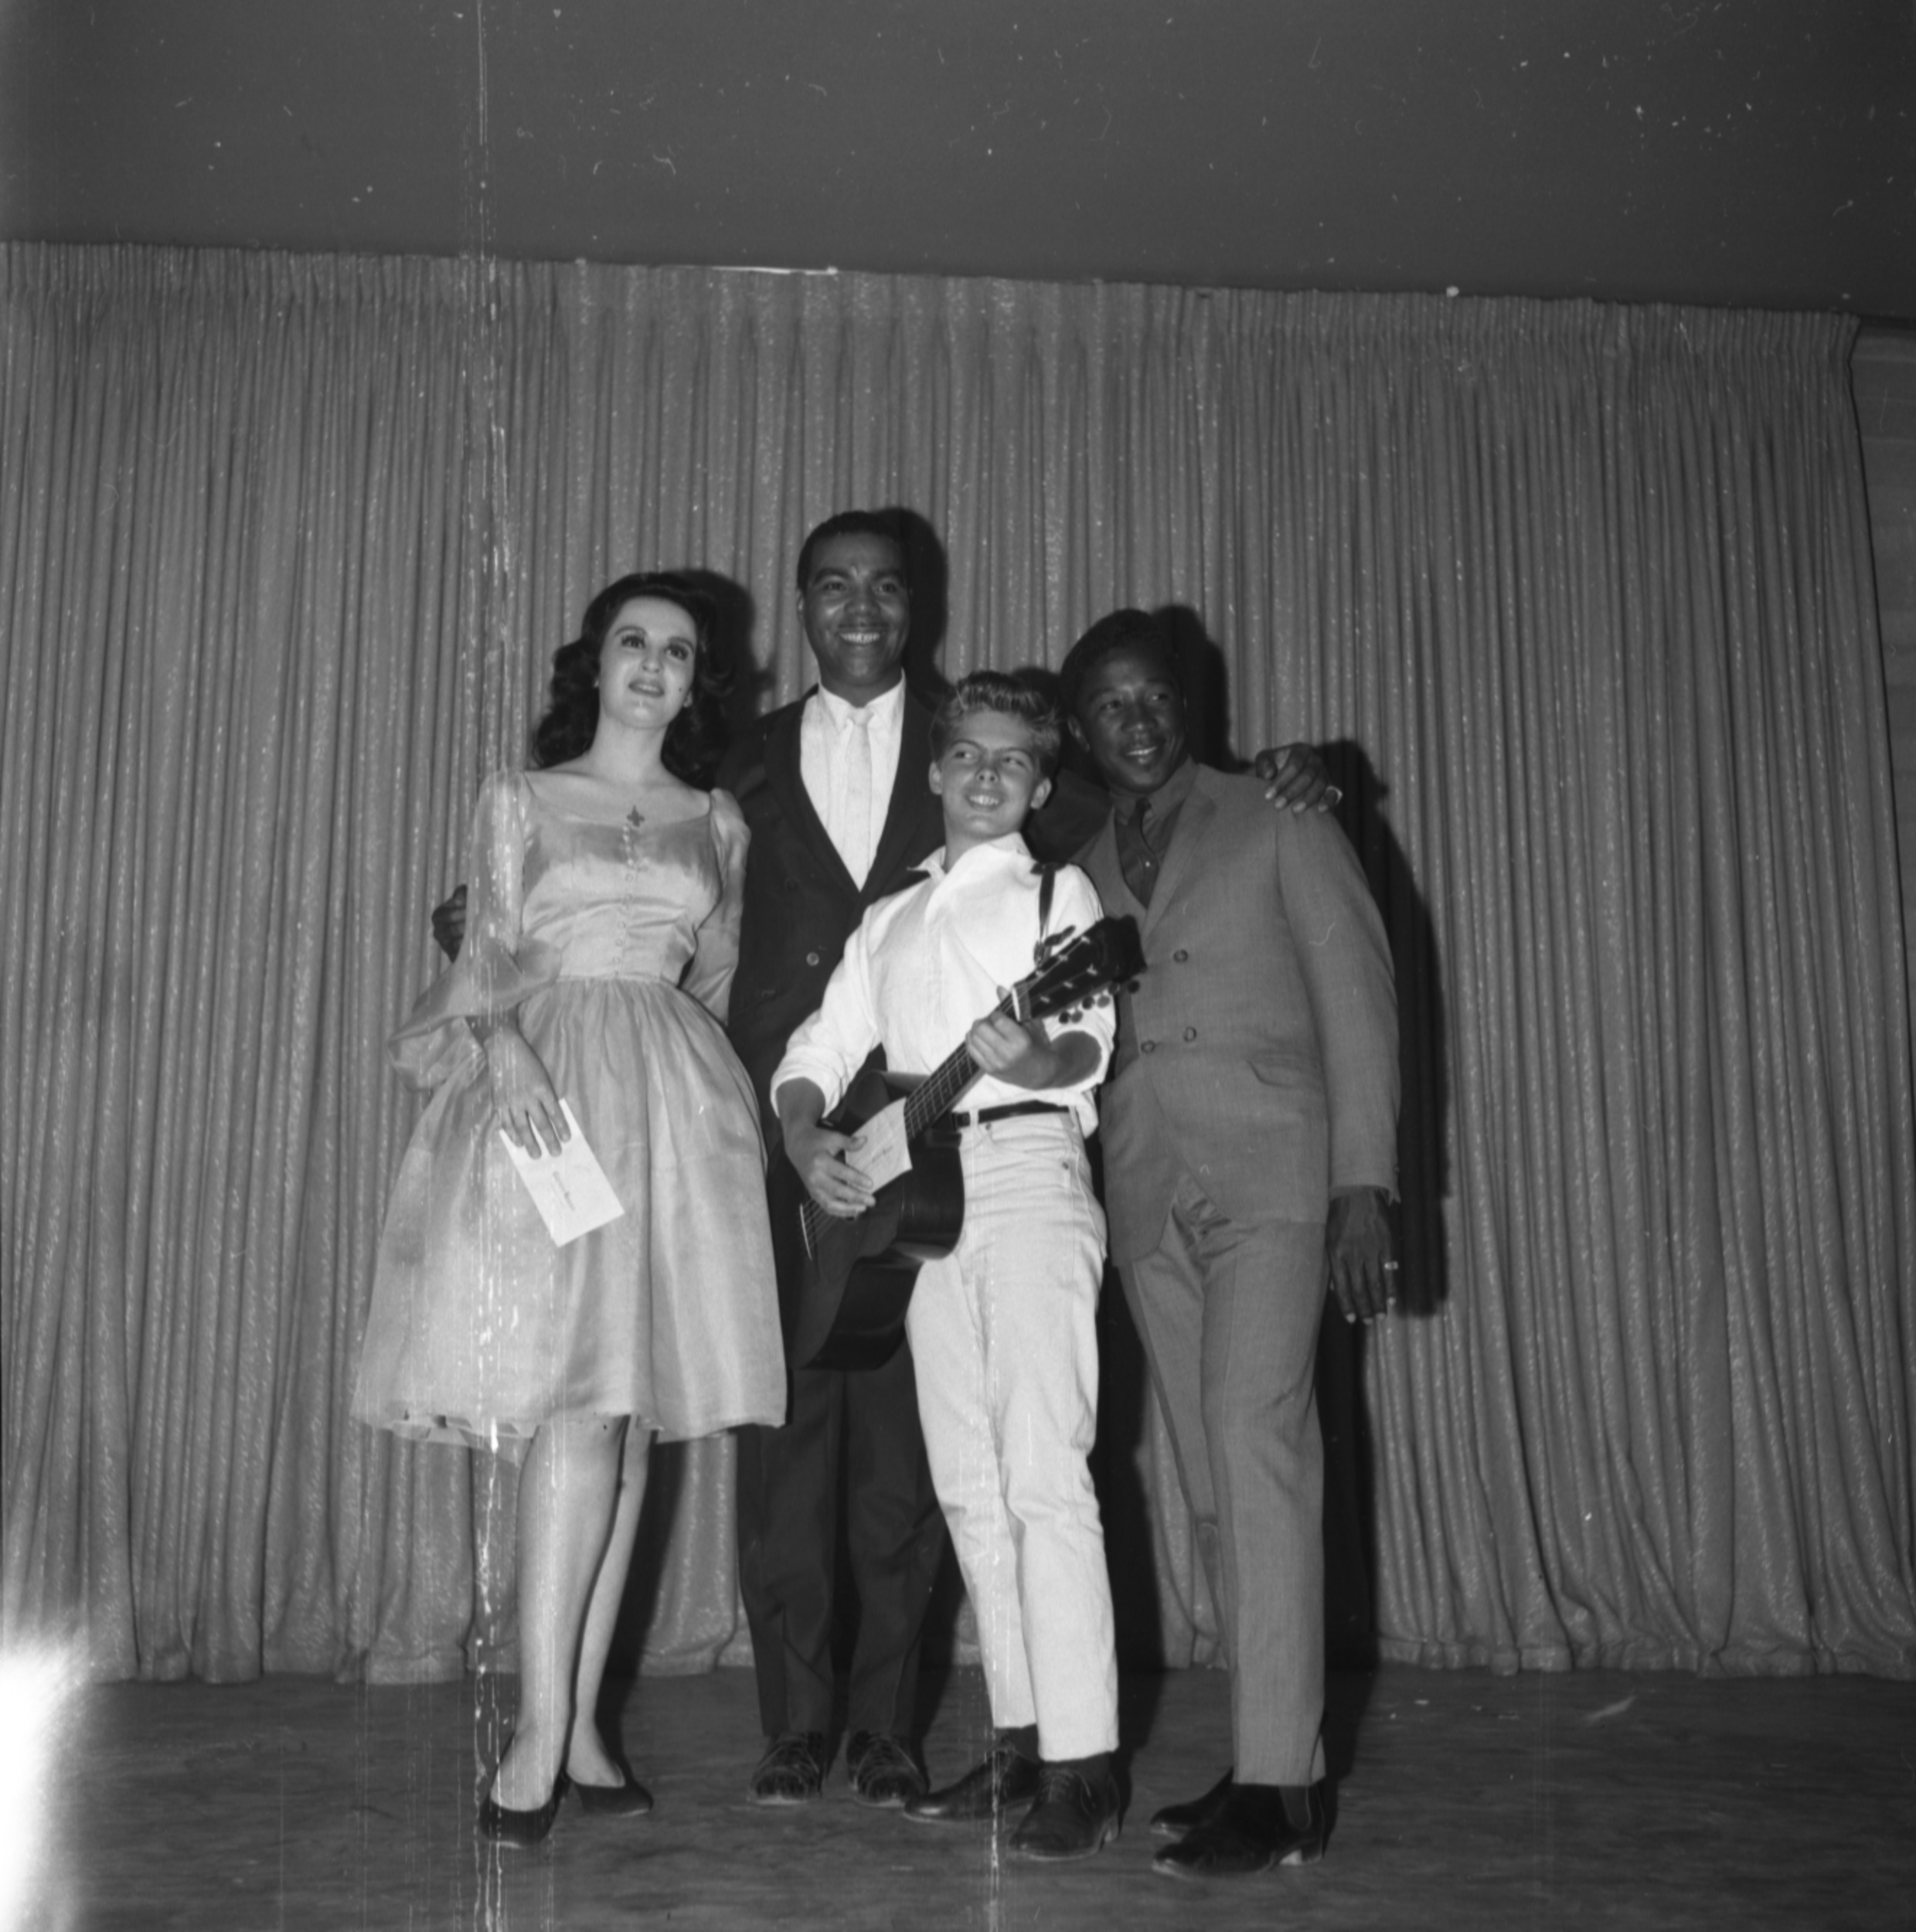 Carver House Talent Contest, May 9, 1962, Image 07